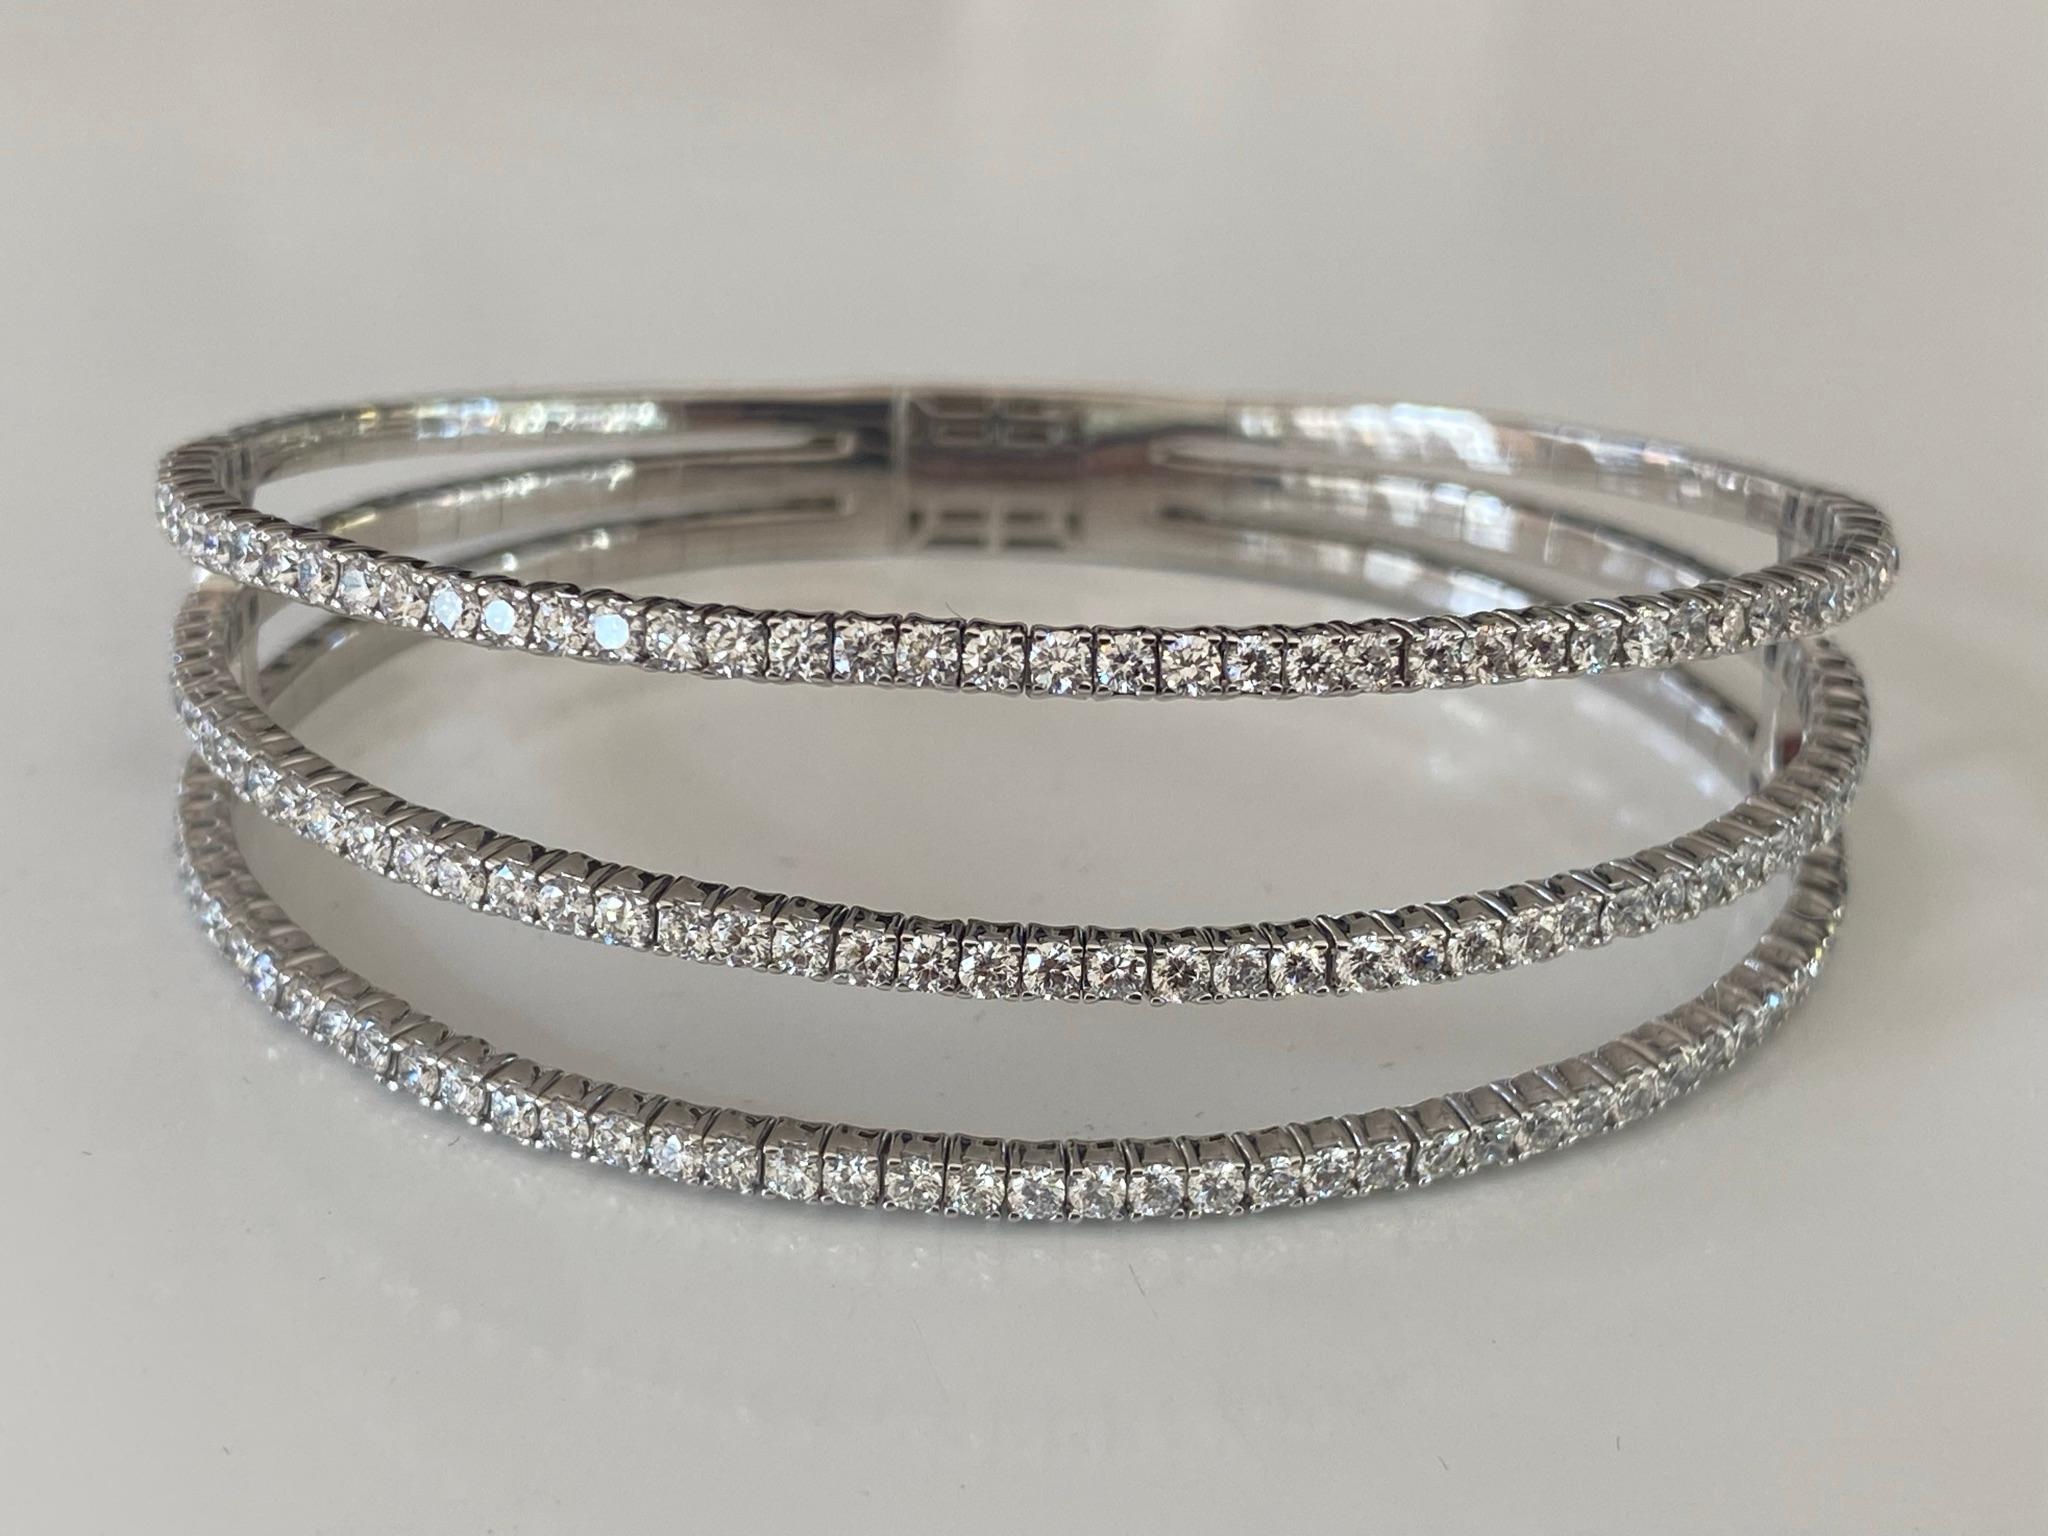 Crafted from 14kt white gold, this flexible bangle bracelet features 141 round diamonds, G color, VS-SI clarity that glisten over three rows. The diamonds total 3.70 carats and the bracelet measures 7 inches. 

